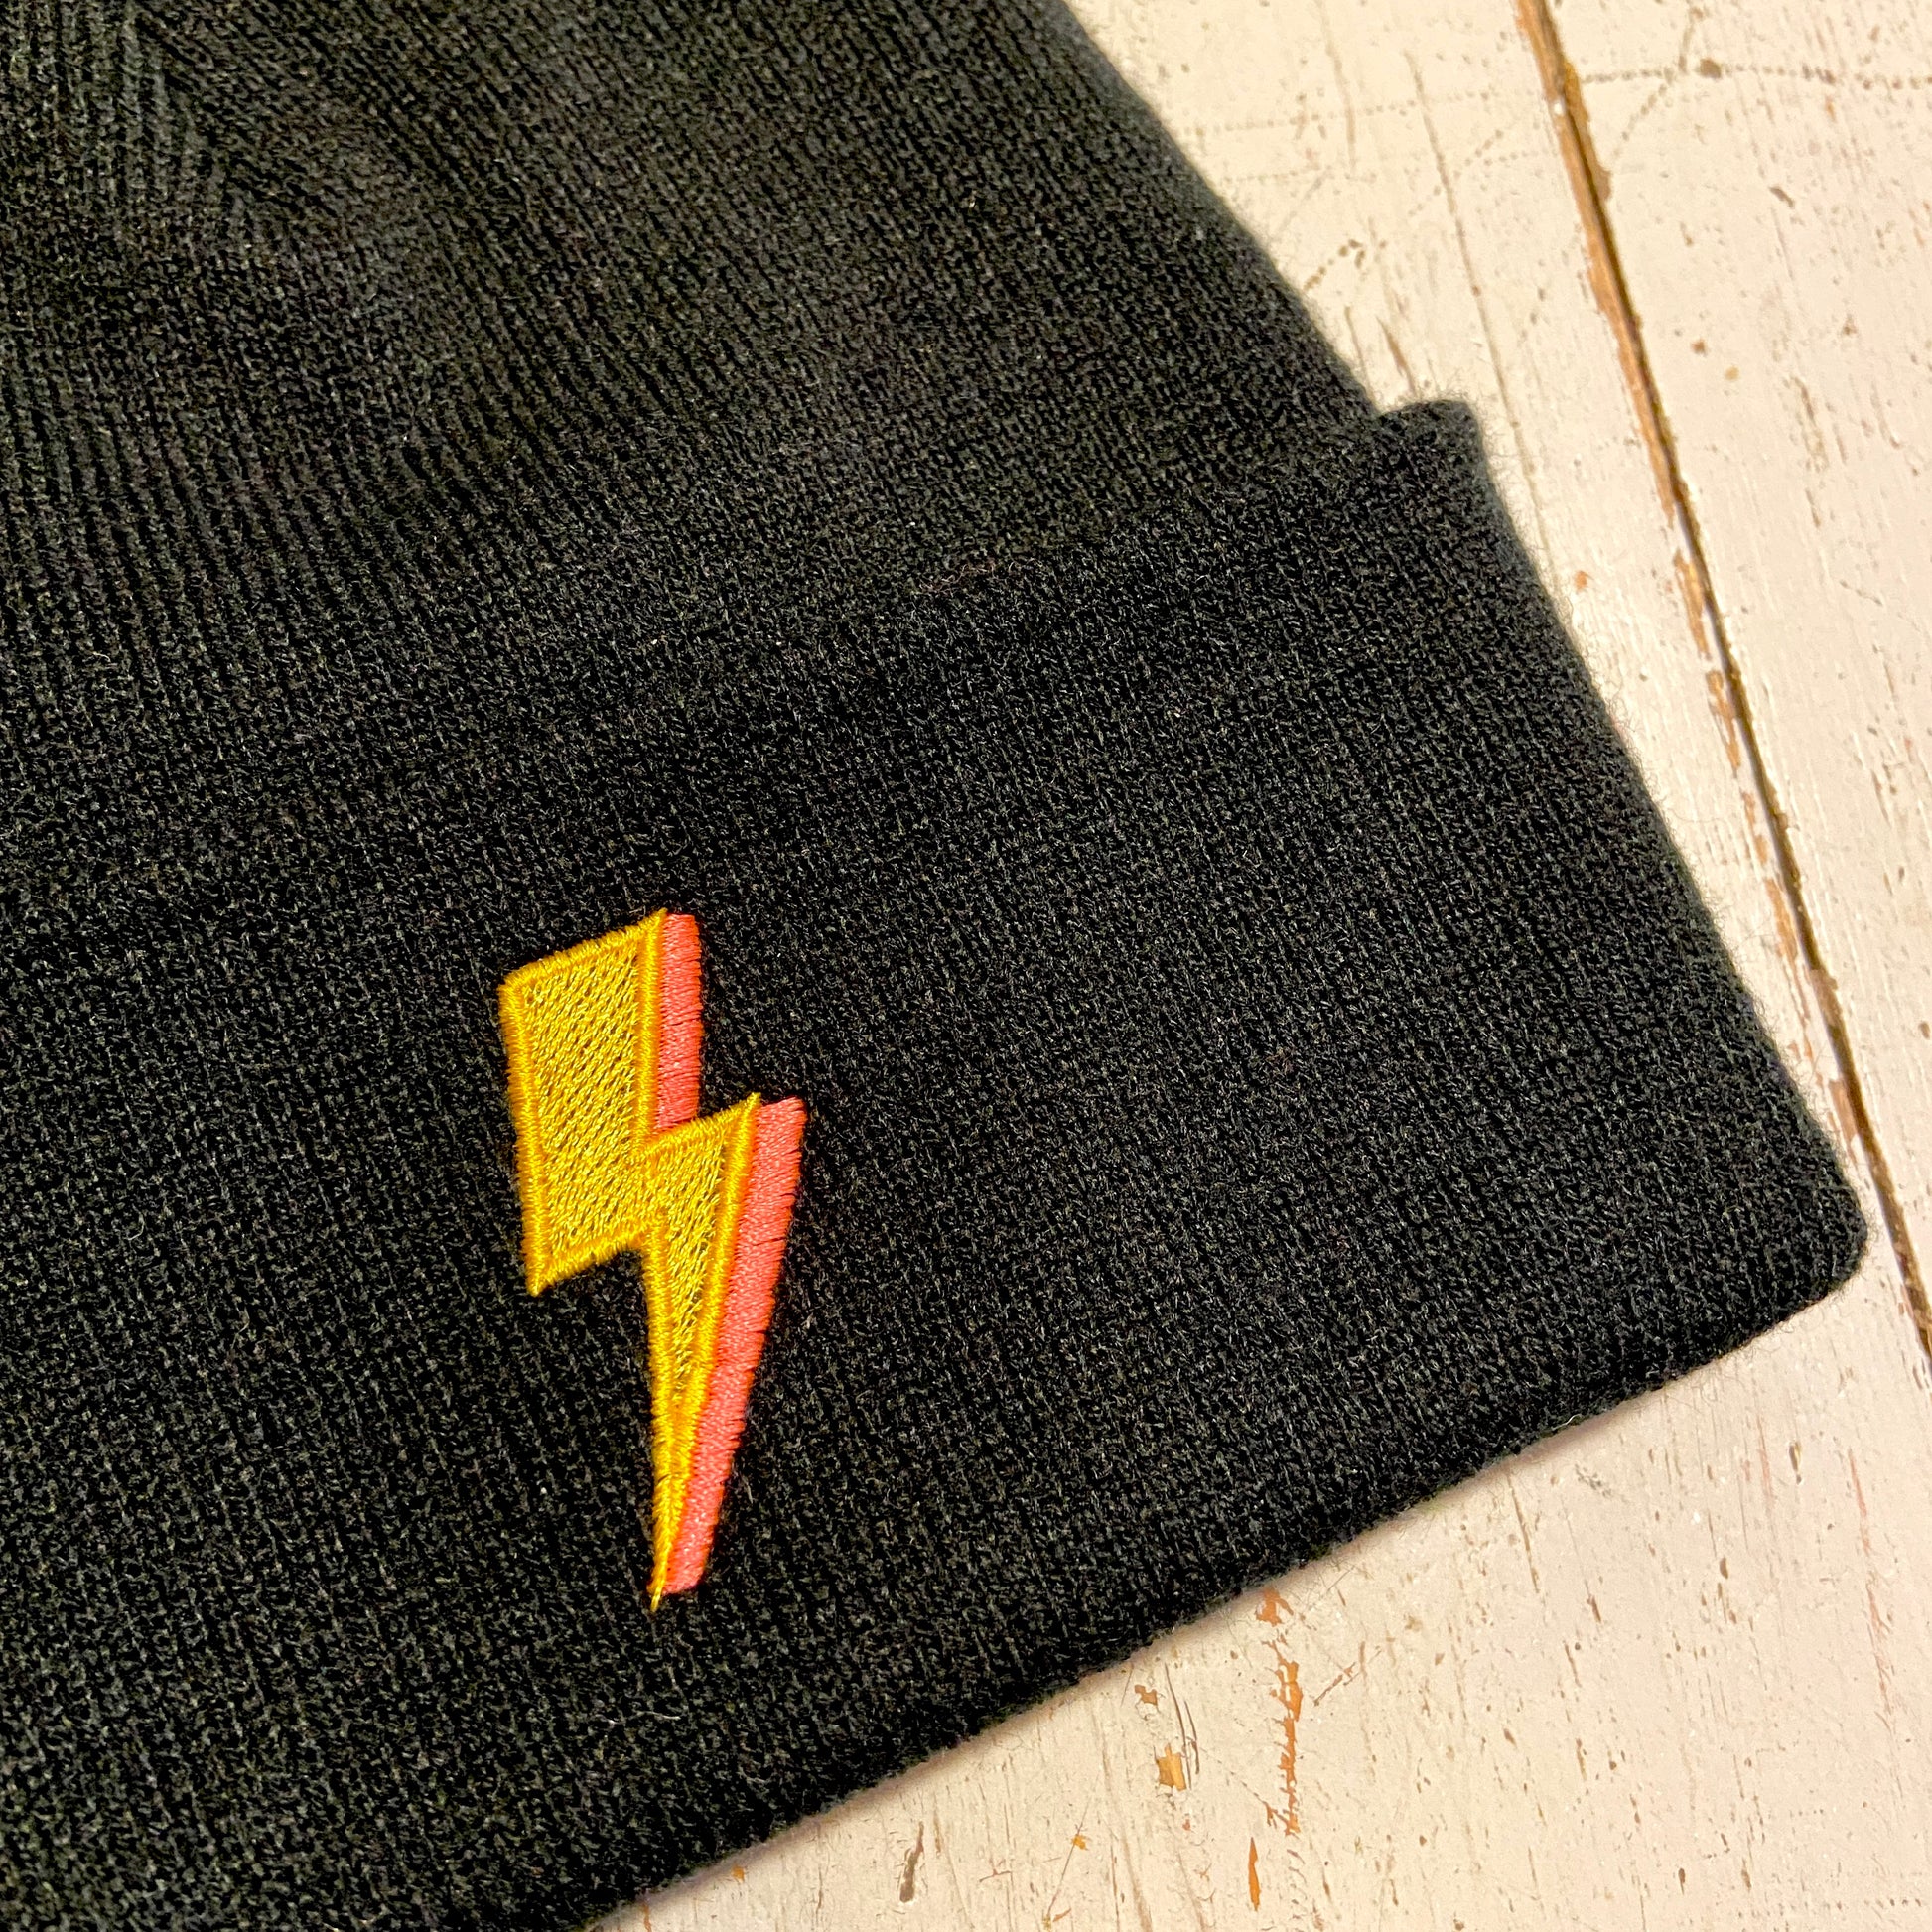 Embroidered to match our ever popular lighting bolt design.  Available in Teal or black  Beanies are made from 100% soft-touch acrylic in a double layer knit. One size fits all. Glitter & Mud